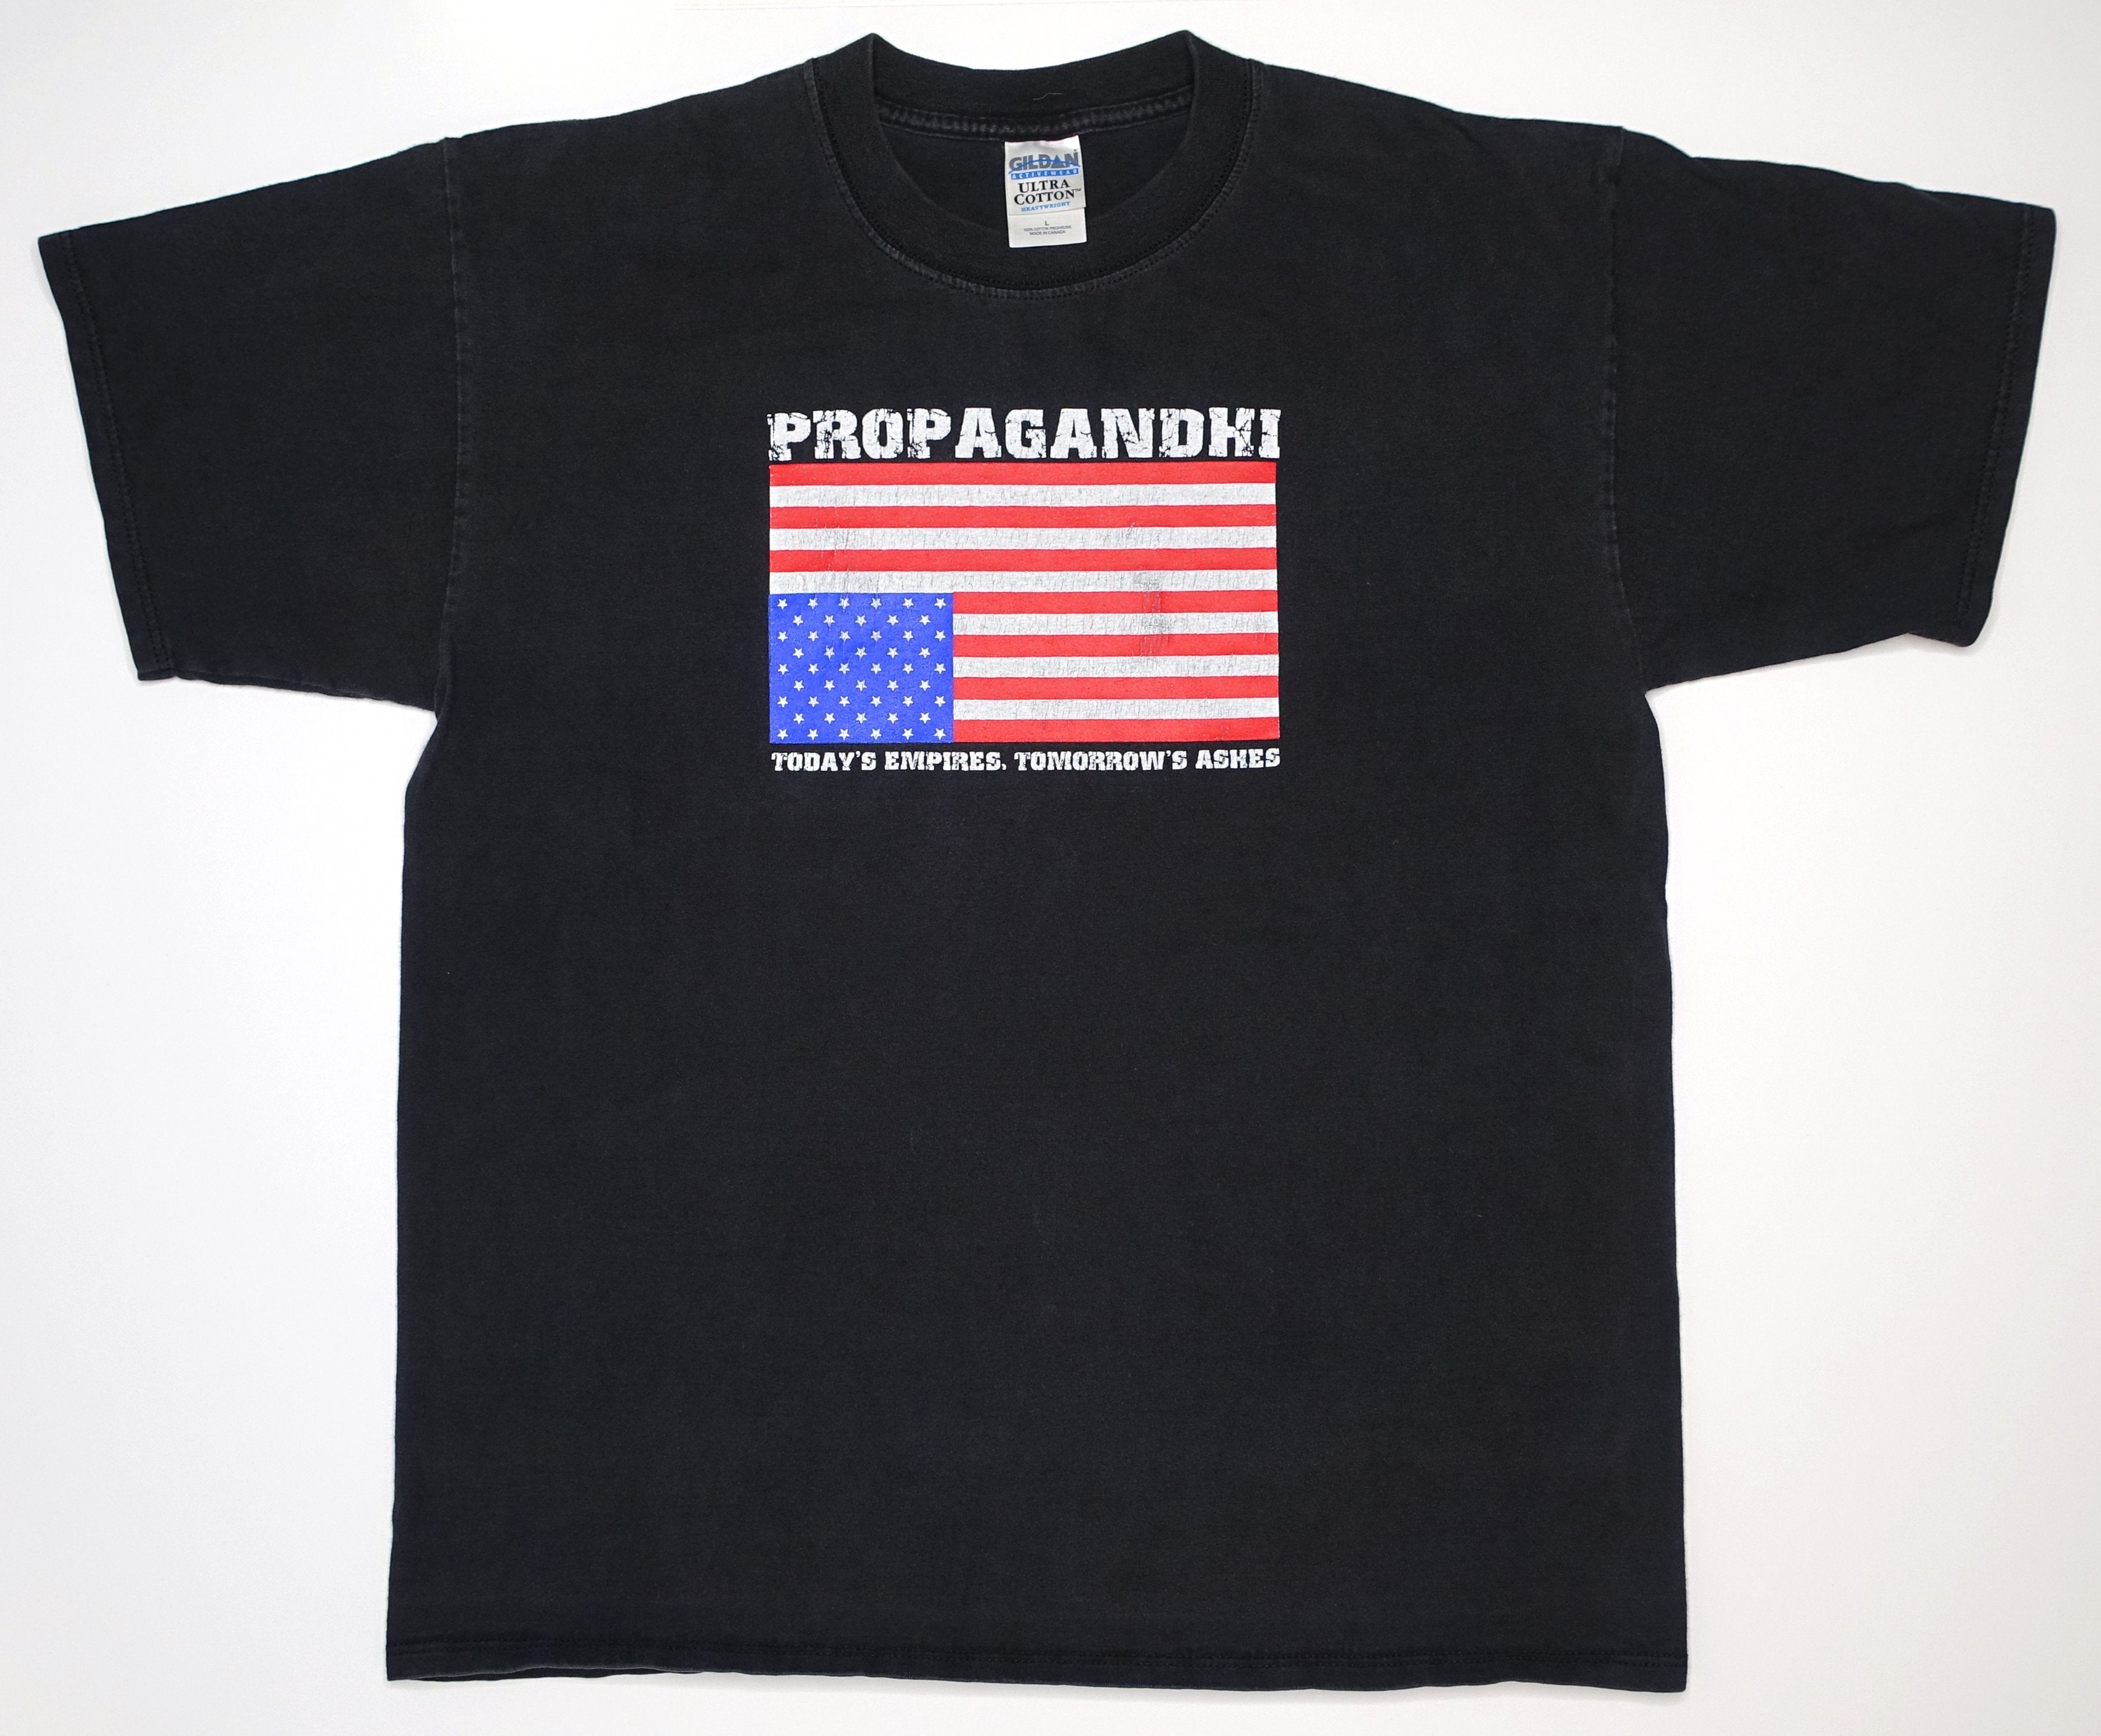 Propagandhi - Today's Empire, Tomorrow's Ashes (Upside Down Flag) 2001 Promo/ Mail-Order? Shirt Size Large